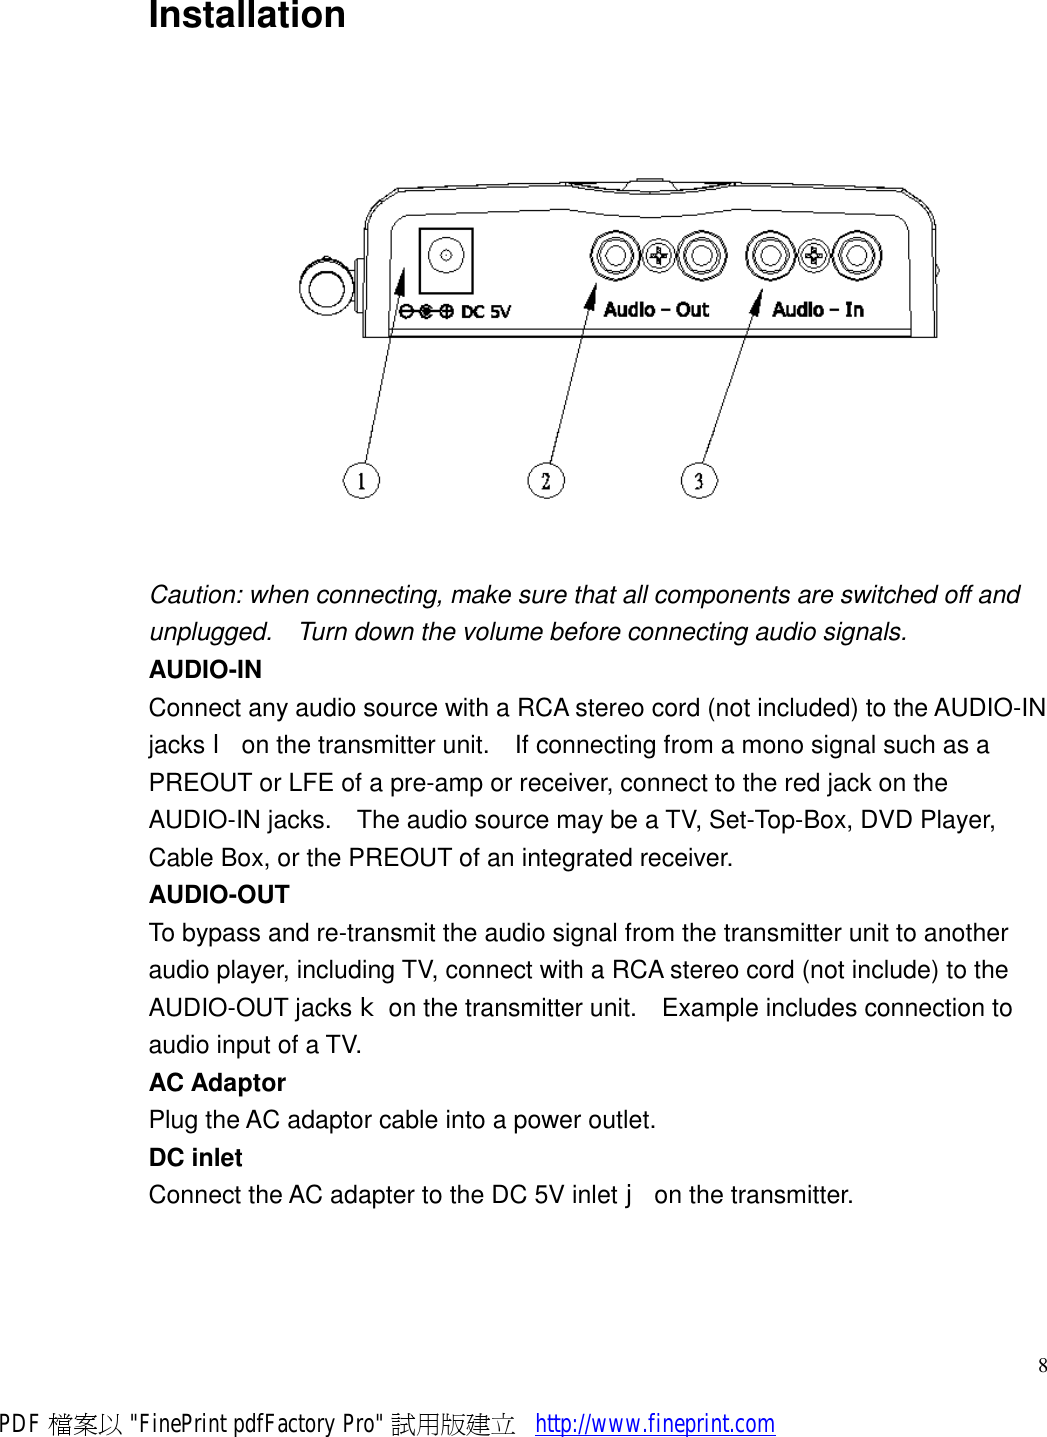     8Installation  Caution: when connecting, make sure that all components are switched off and unplugged.  Turn down the volume before connecting audio signals. AUDIO-IN Connect any audio source with a RCA stereo cord (not included) to the AUDIO-IN jacks l on the transmitter unit.  If connecting from a mono signal such as a PREOUT or LFE of a pre-amp or receiver, connect to the red jack on the AUDIO-IN jacks.  The audio source may be a TV, Set-Top-Box, DVD Player, Cable Box, or the PREOUT of an integrated receiver. AUDIO-OUT To bypass and re-transmit the audio signal from the transmitter unit to another audio player, including TV, connect with a RCA stereo cord (not include) to the AUDIO-OUT jacks k on the transmitter unit.  Example includes connection to audio input of a TV. AC Adaptor Plug the AC adaptor cable into a power outlet. DC inlet Connect the AC adapter to the DC 5V inlet j on the transmitter. PDF 檔案以 &quot;FinePrint pdfFactory Pro&quot; 試用版建立           http://www.fineprint.com